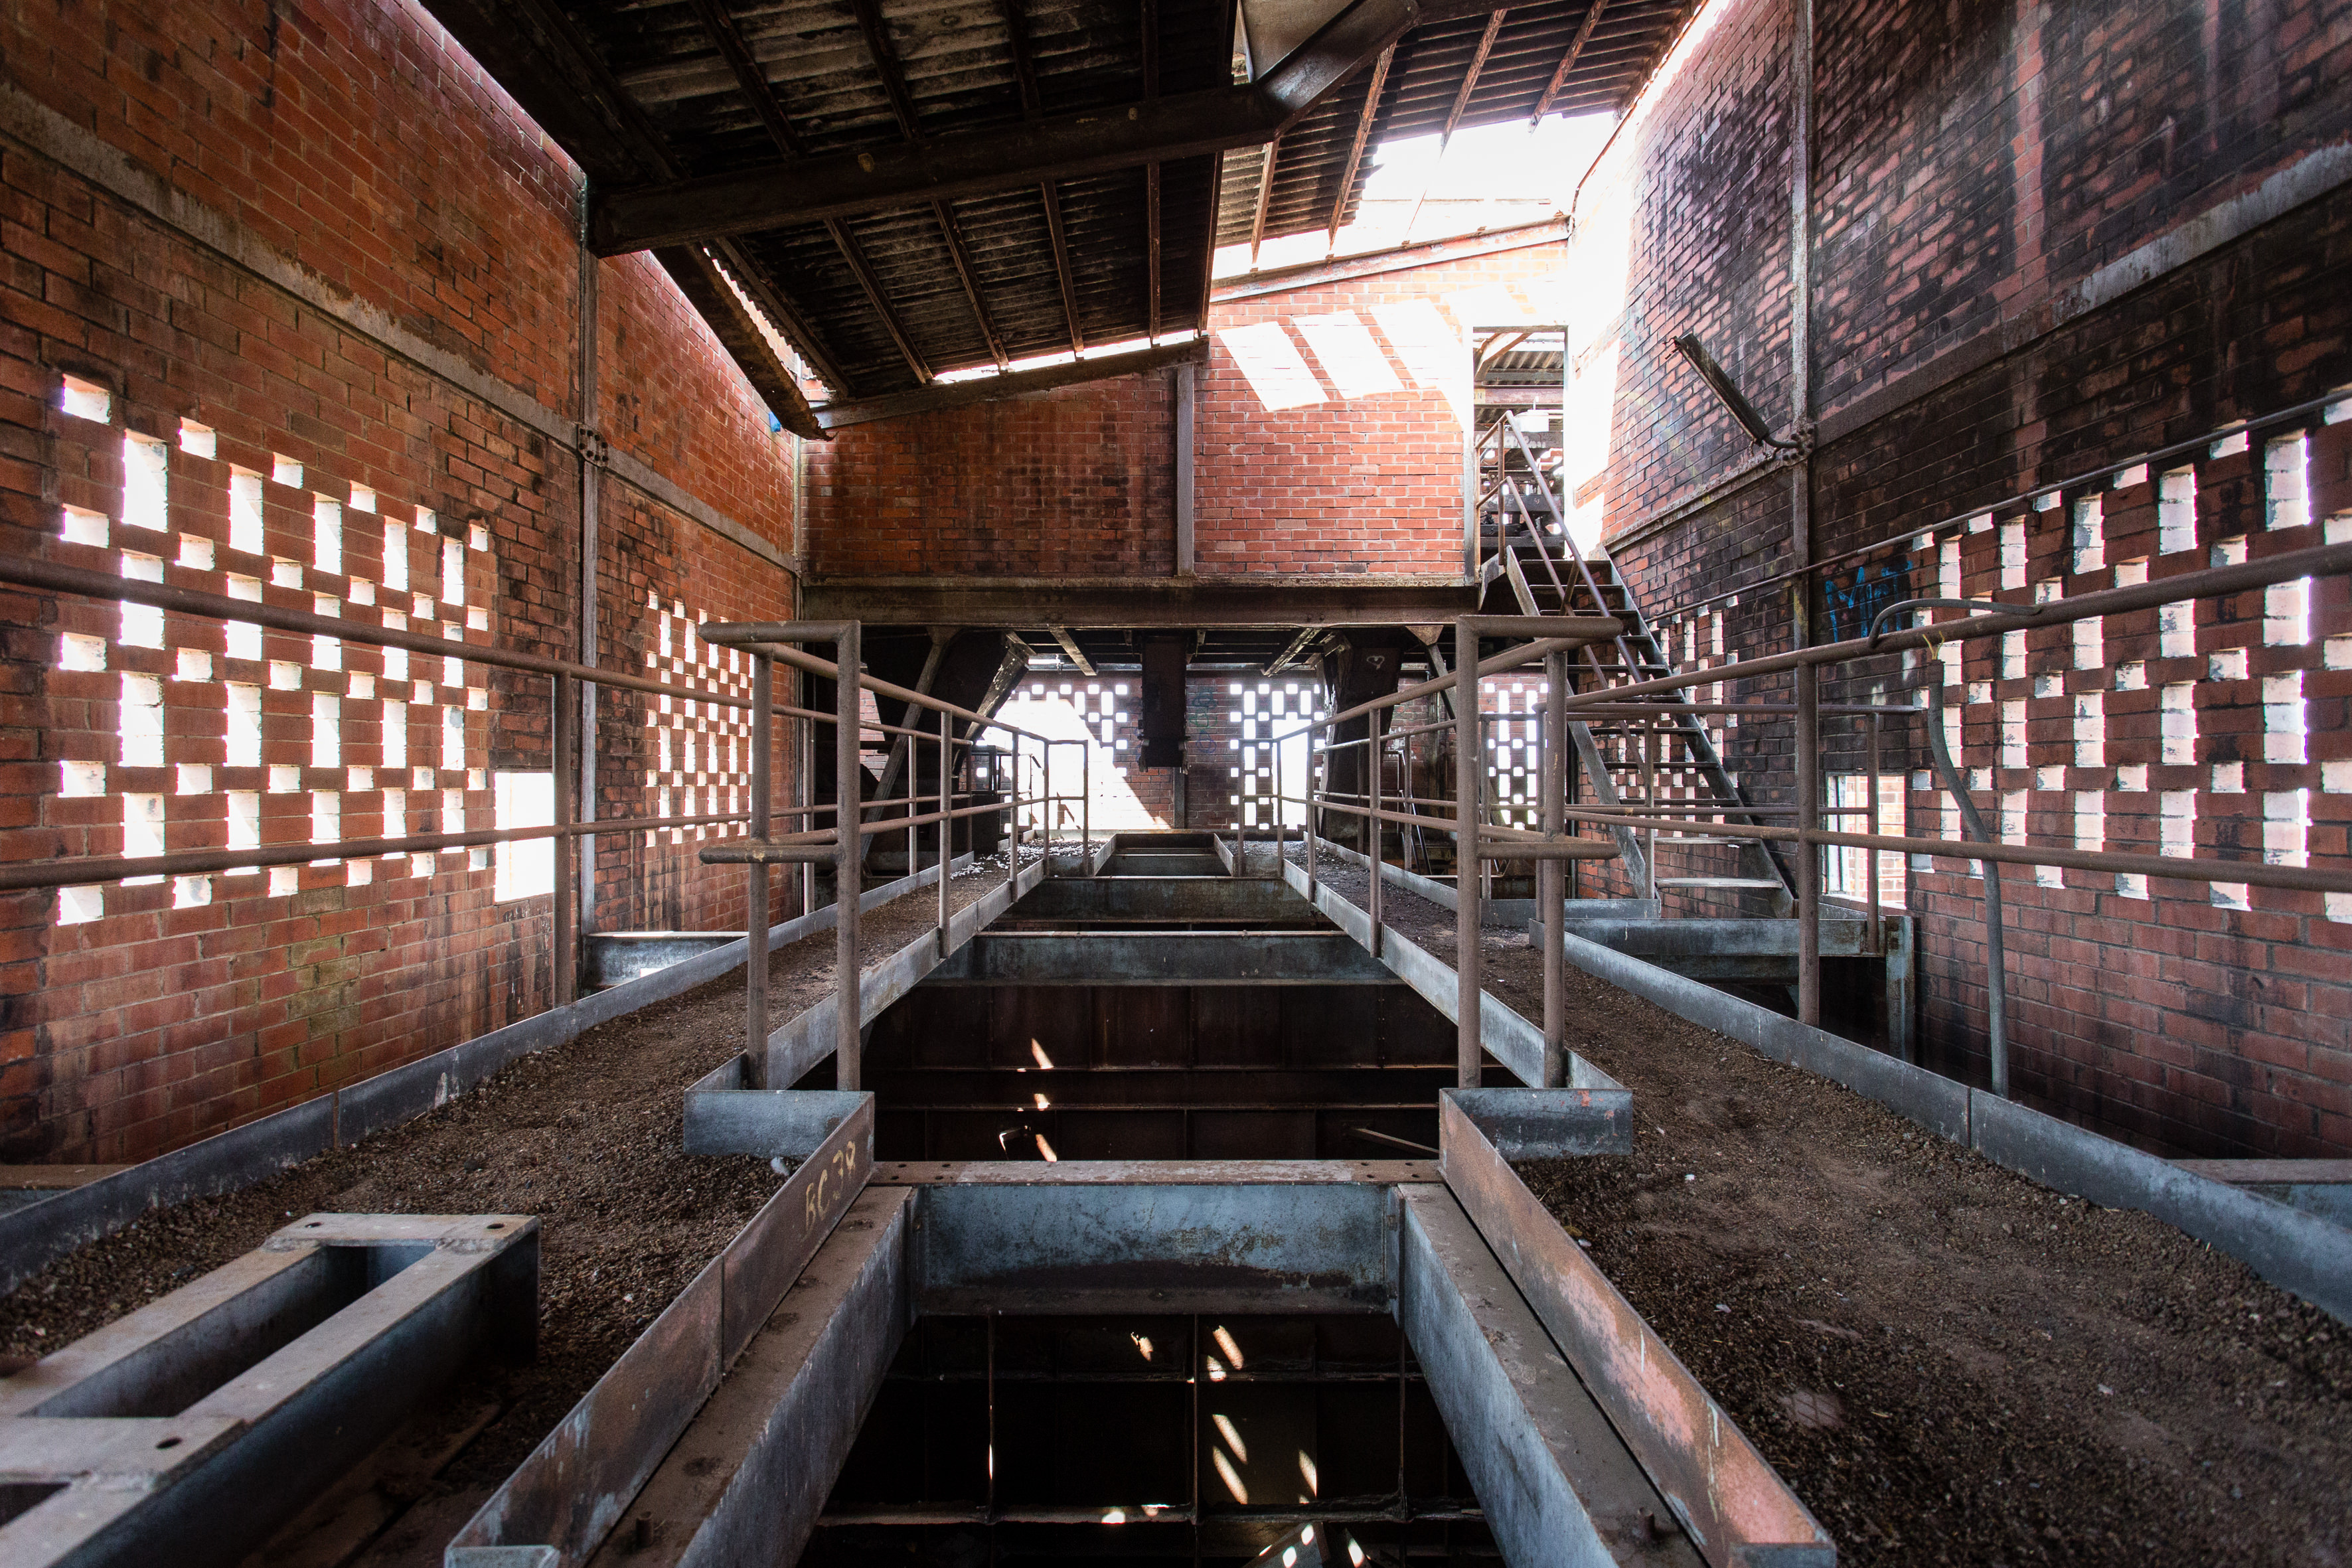 Abandoned Buildings Captured In Stunning UrbEx Photography | HuffPost